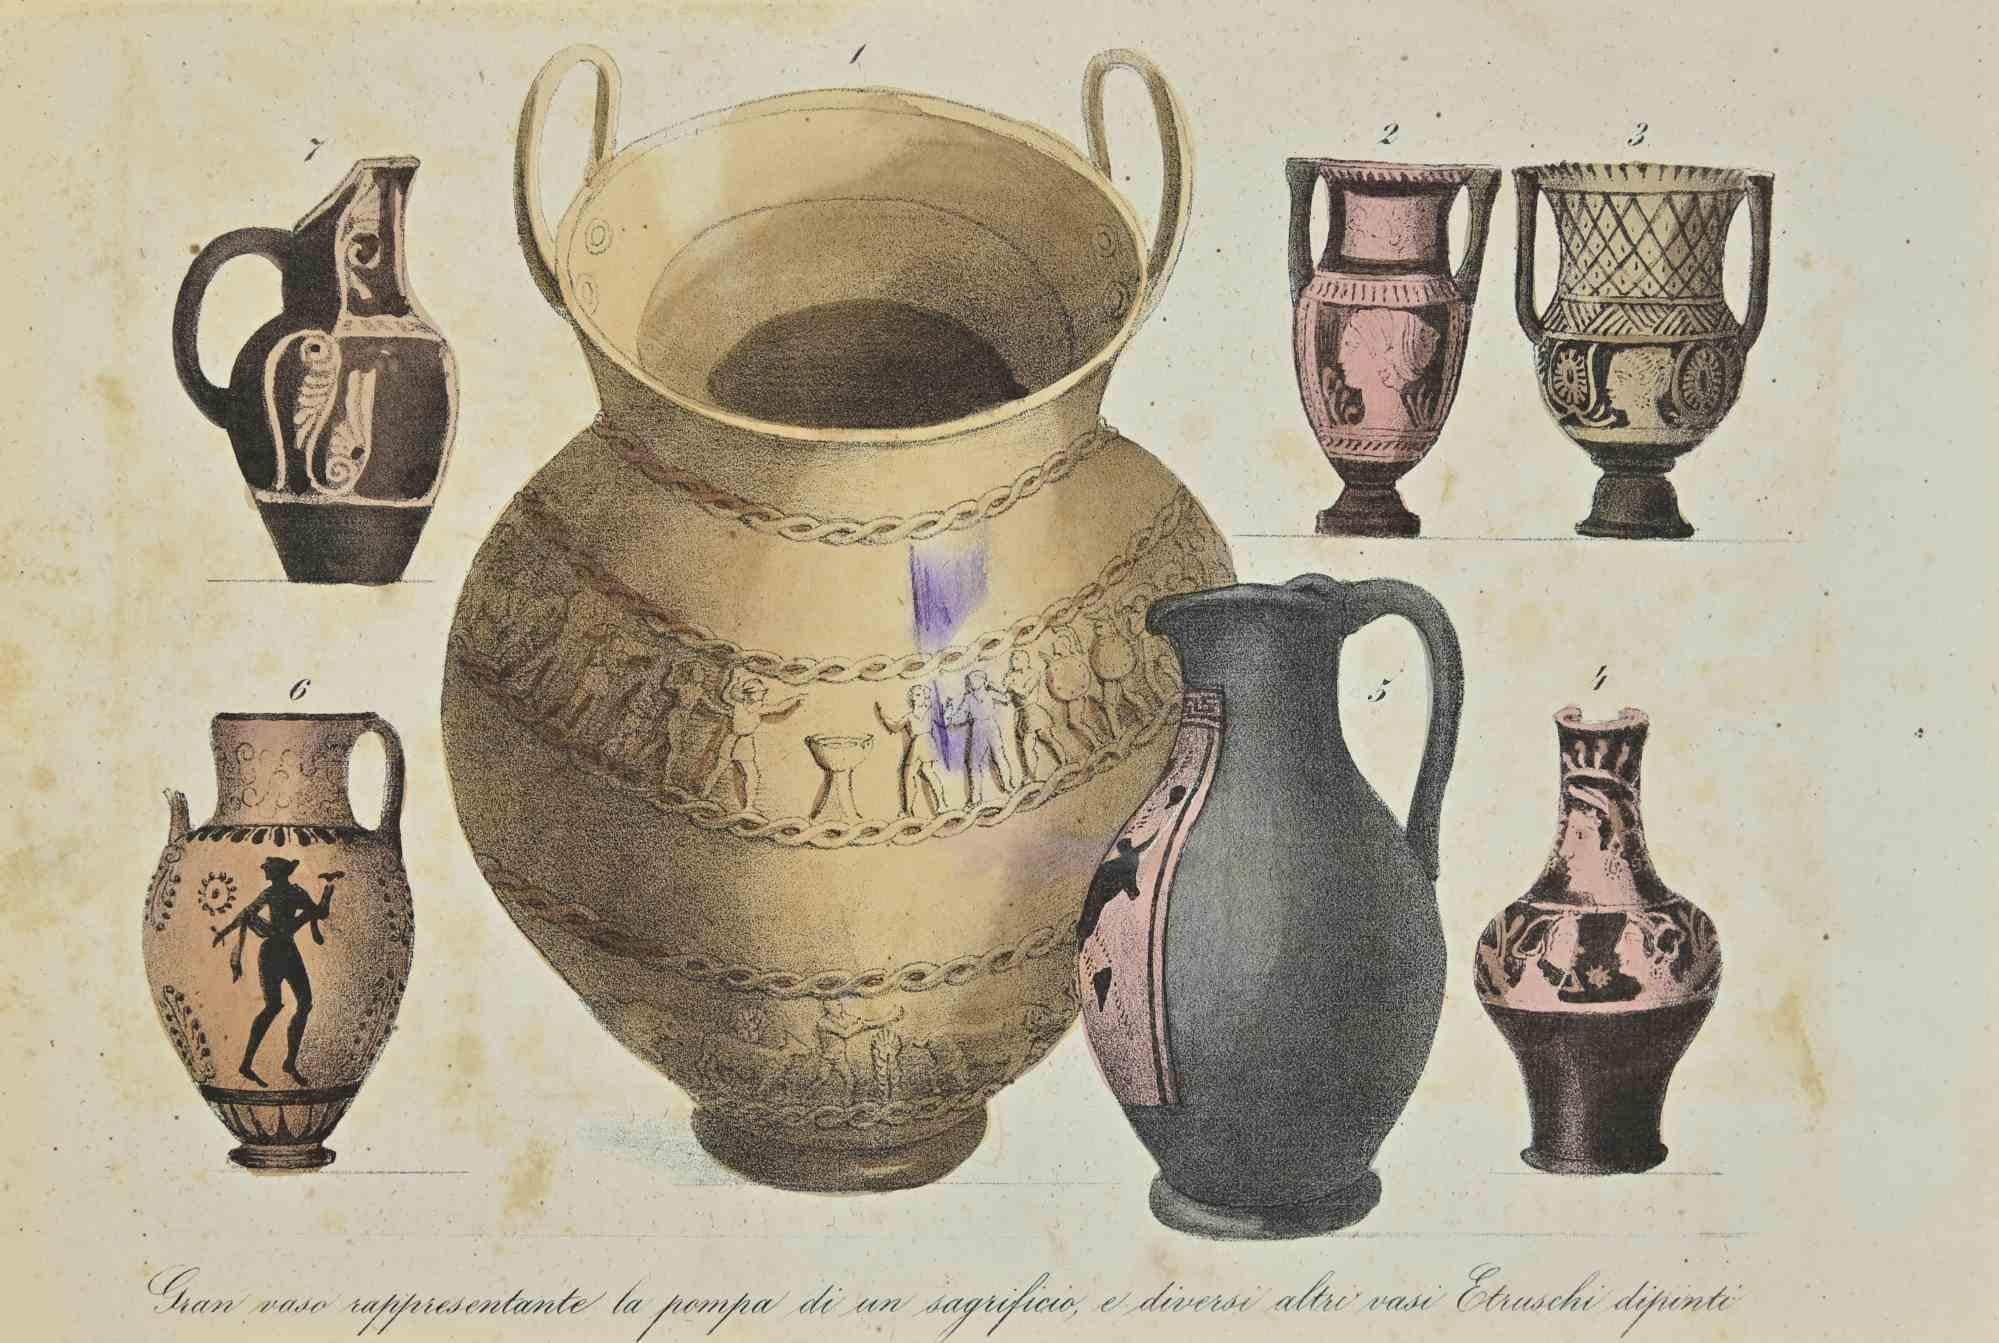 Uses and Customs - Etruscan Painting - Lithograph - 1862